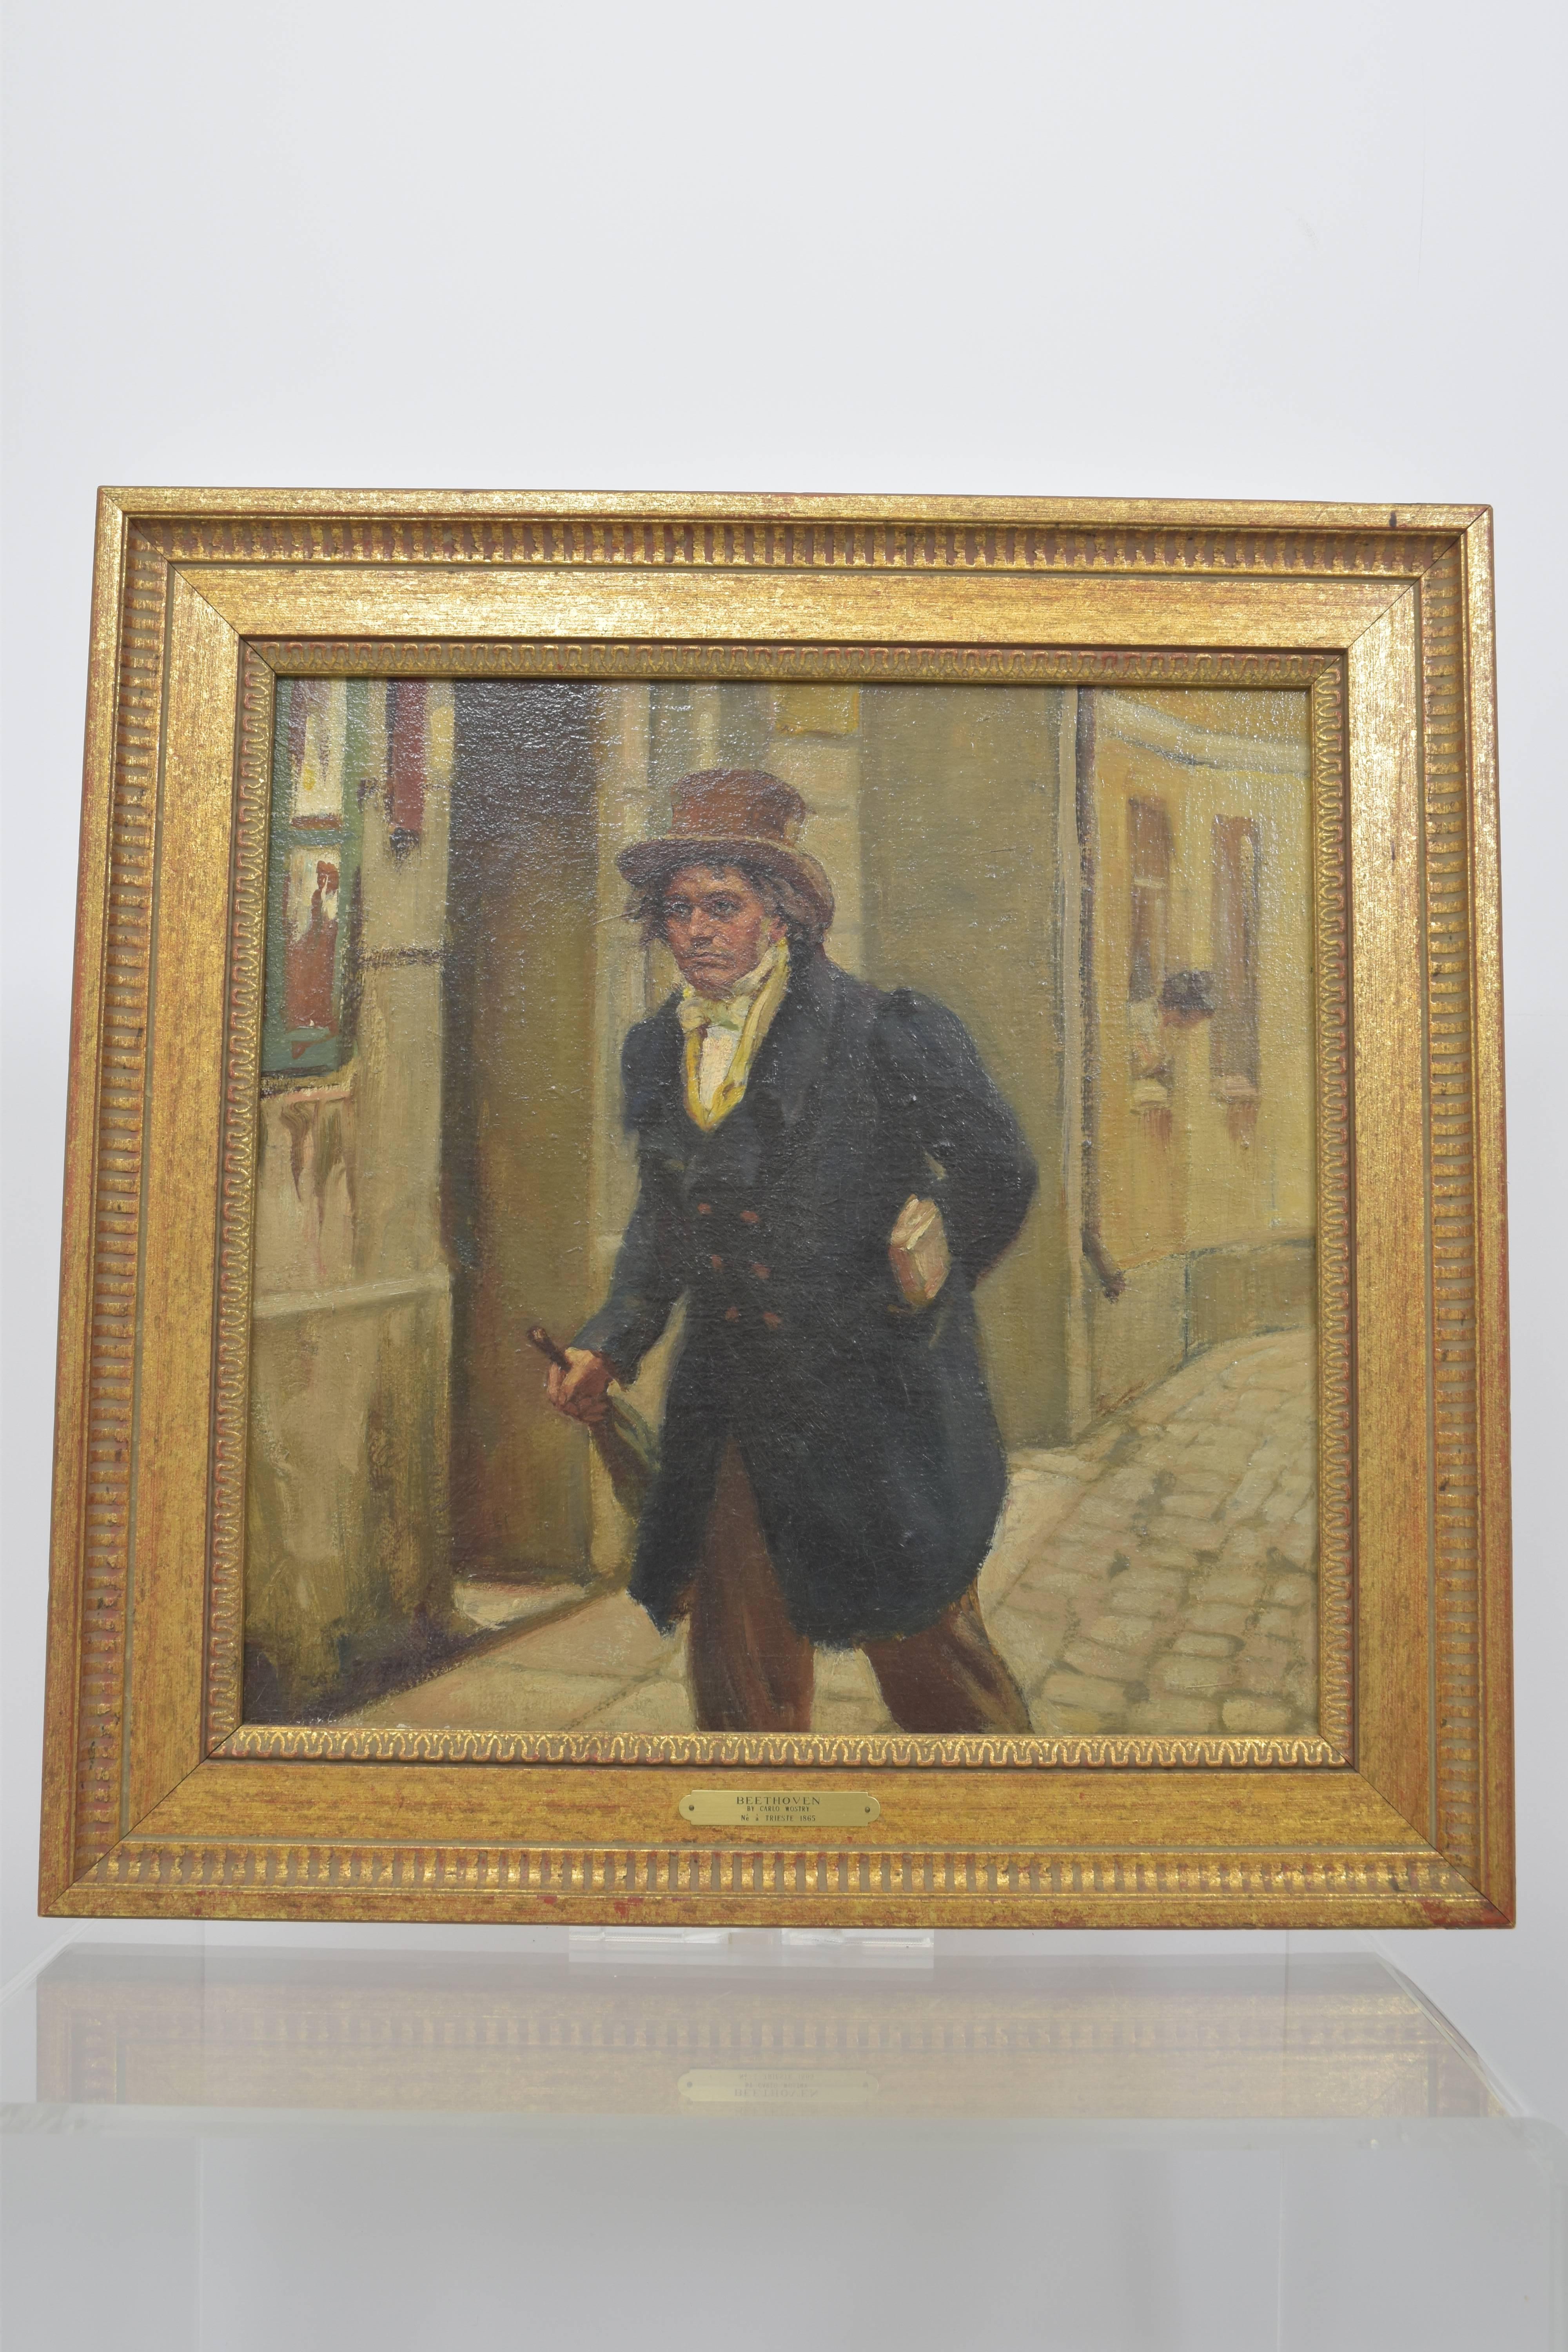 Oil on canvas painting depicting a somber Beethoven walking on a cobblestone street at the foreground with a woman peering out a window in the background. In a giltwood frame with plaque that reads 